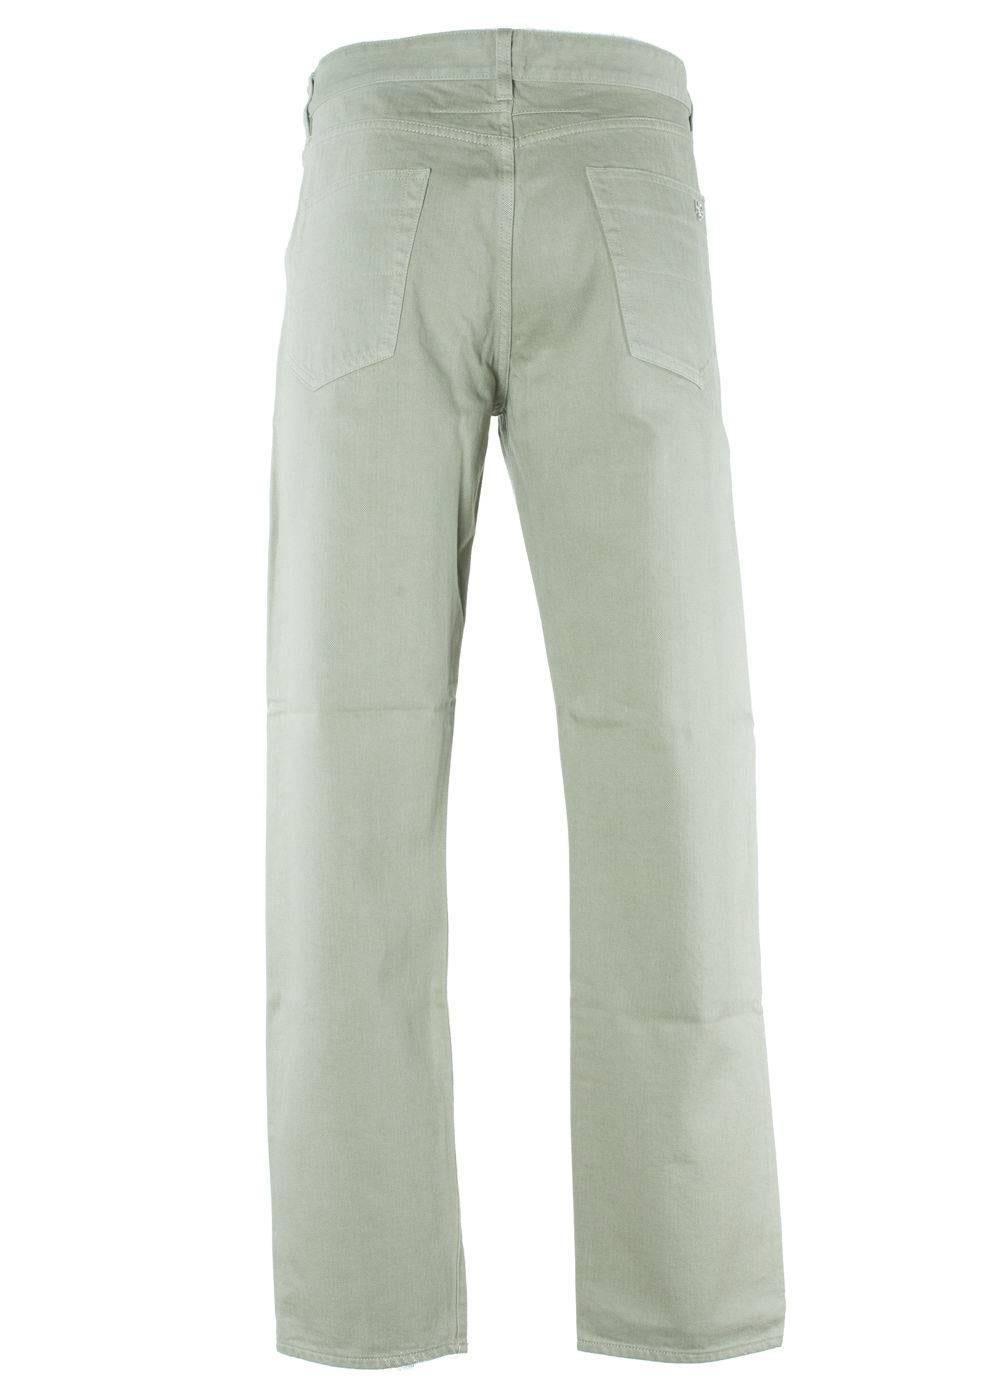 Brand New Givenchy Men's Corduroys
Original Tag
Retails in Stores & Online for $510
Men's Size US 32 Fits True to Size

Corduroy silhouette pants are a must have for any man's closet on all four season. These light olive corduroys are super